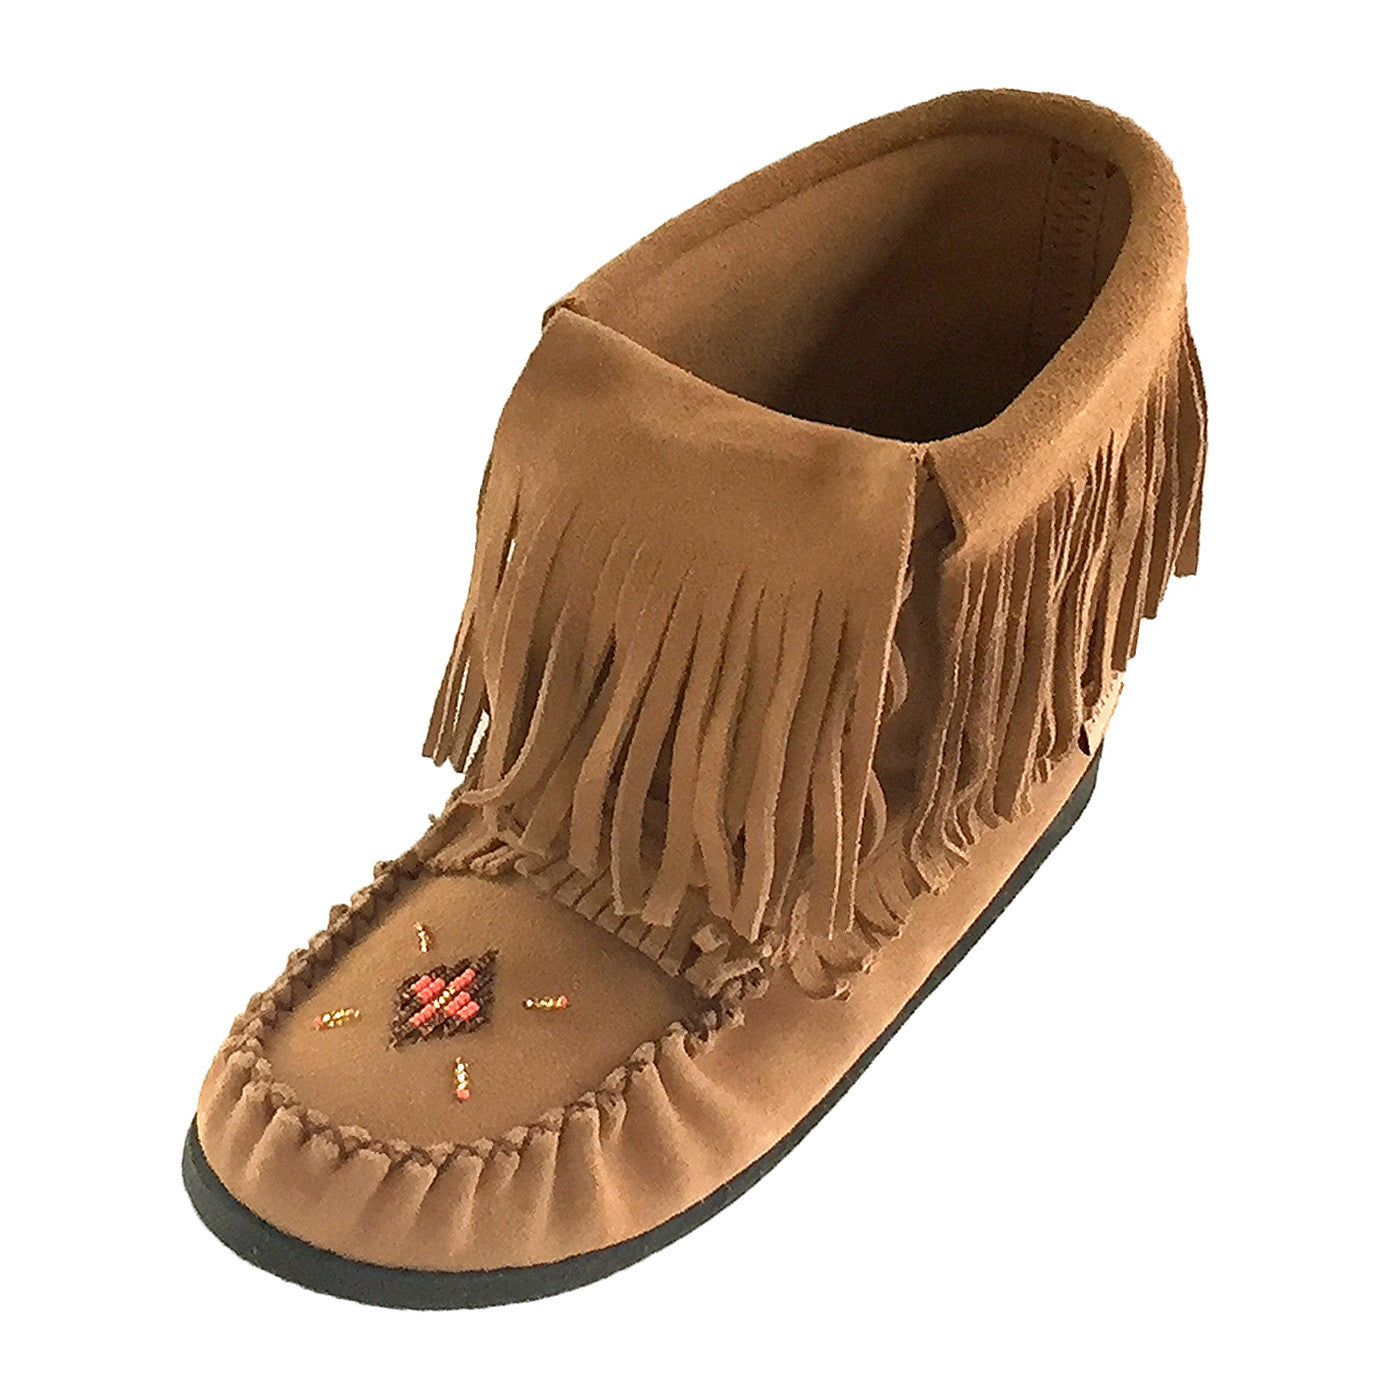 Moka Suede Moccasin Boots 